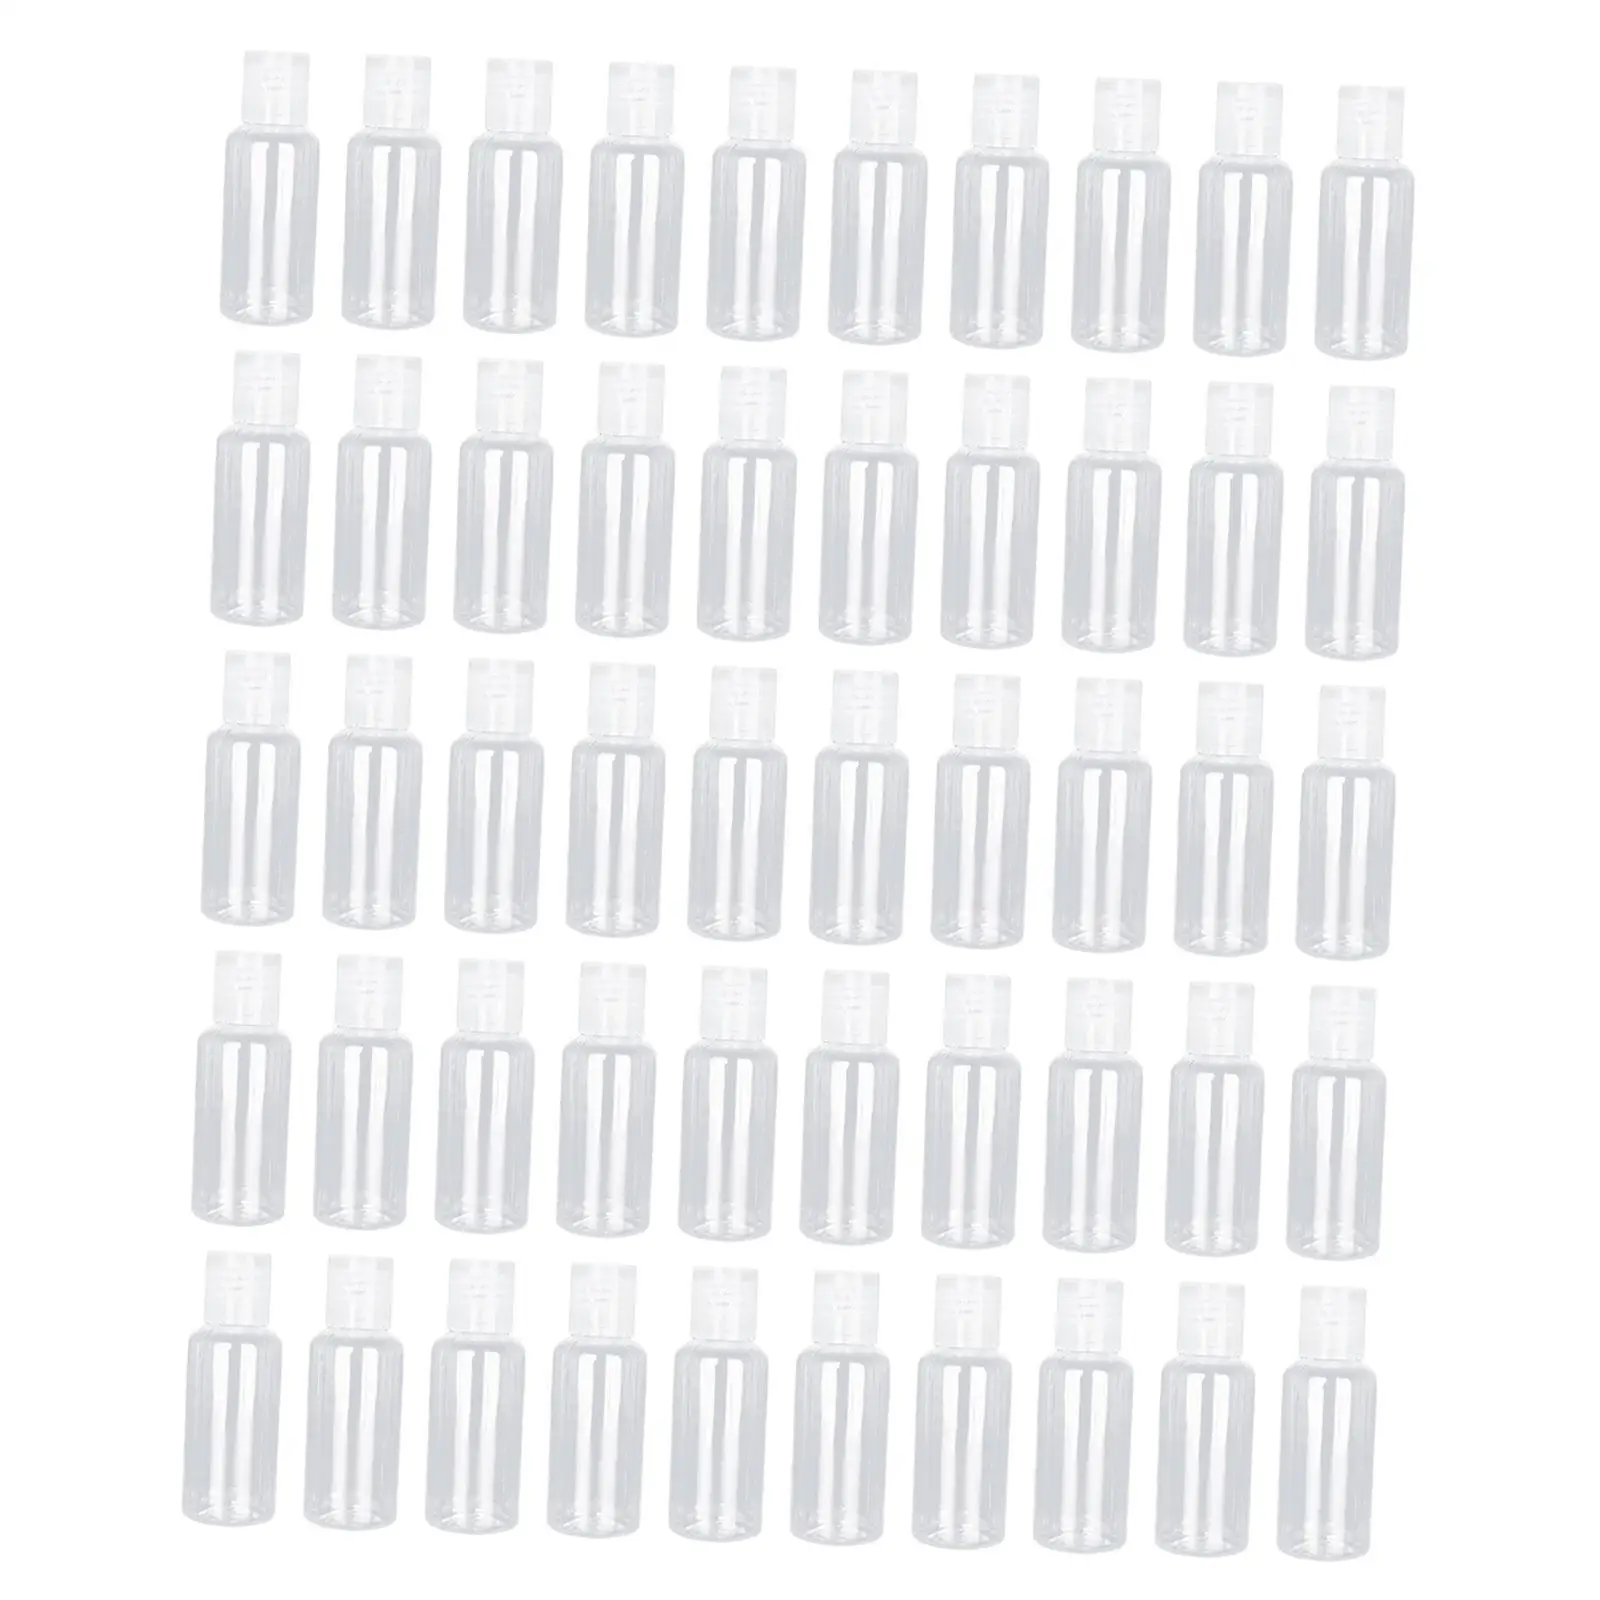 50x Cosmetic Bottle Leakproof Travel Size Empty with Lid Refillable Bottles